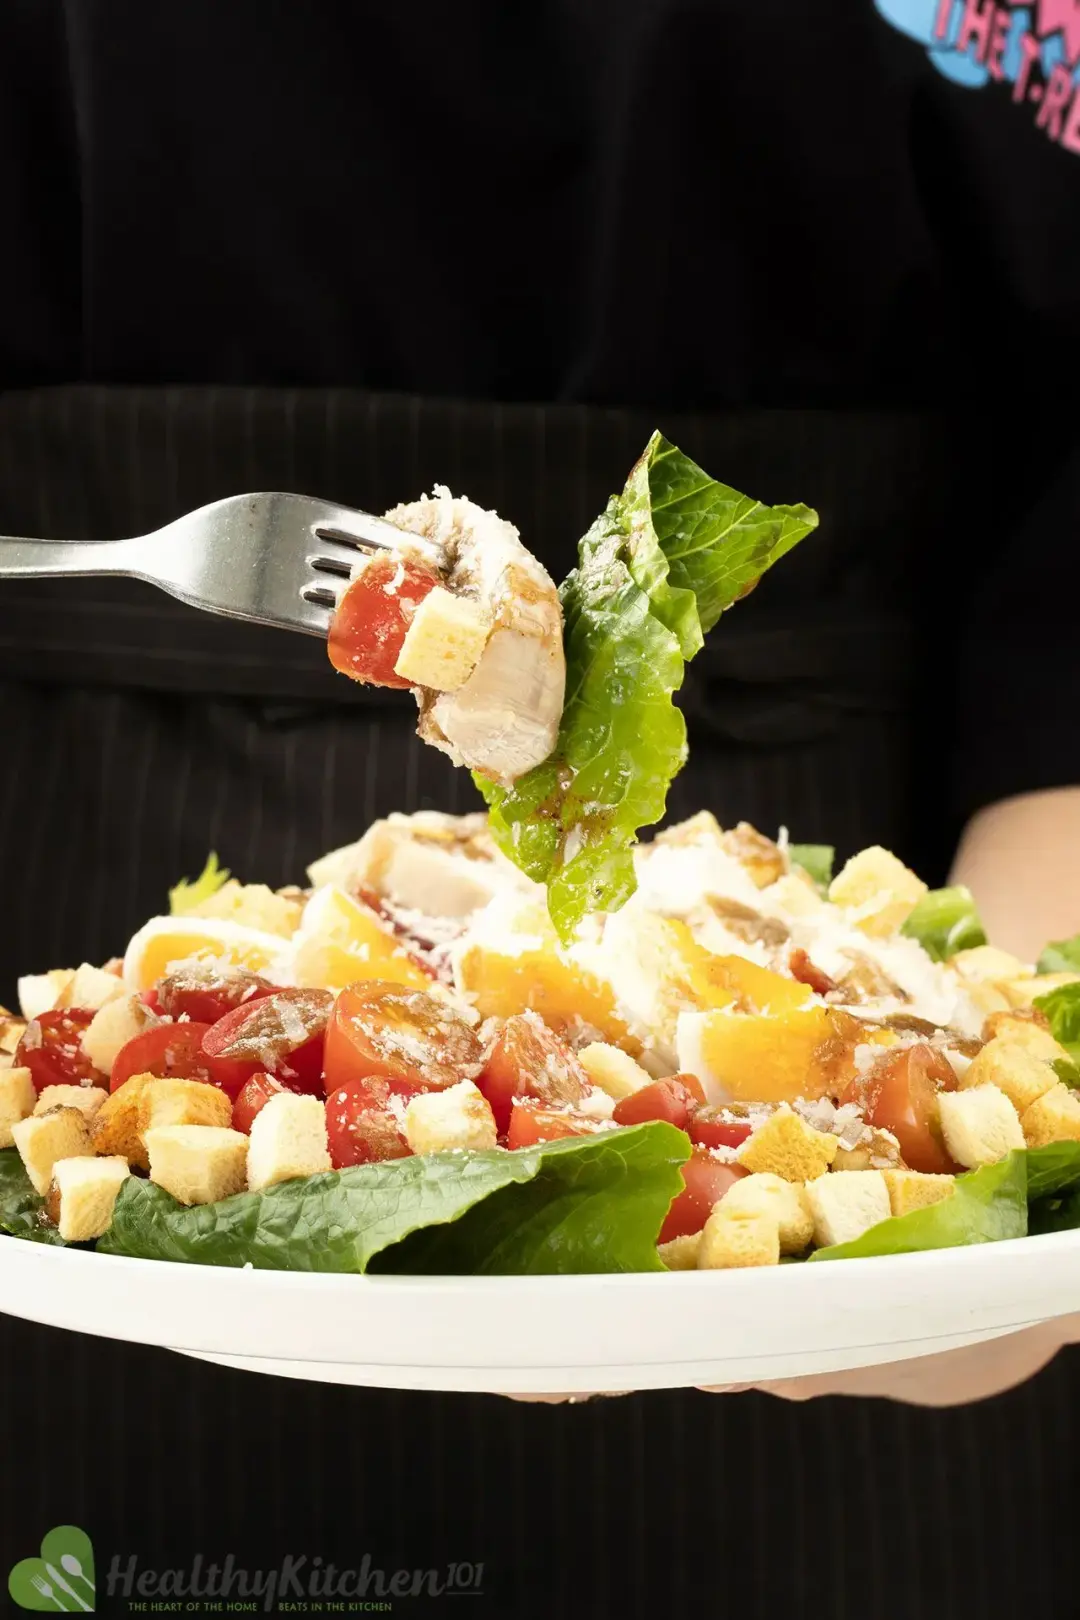 A plate of Caesar salad with lettuce, croutons, eggs, cherry tomatoes, and dressing